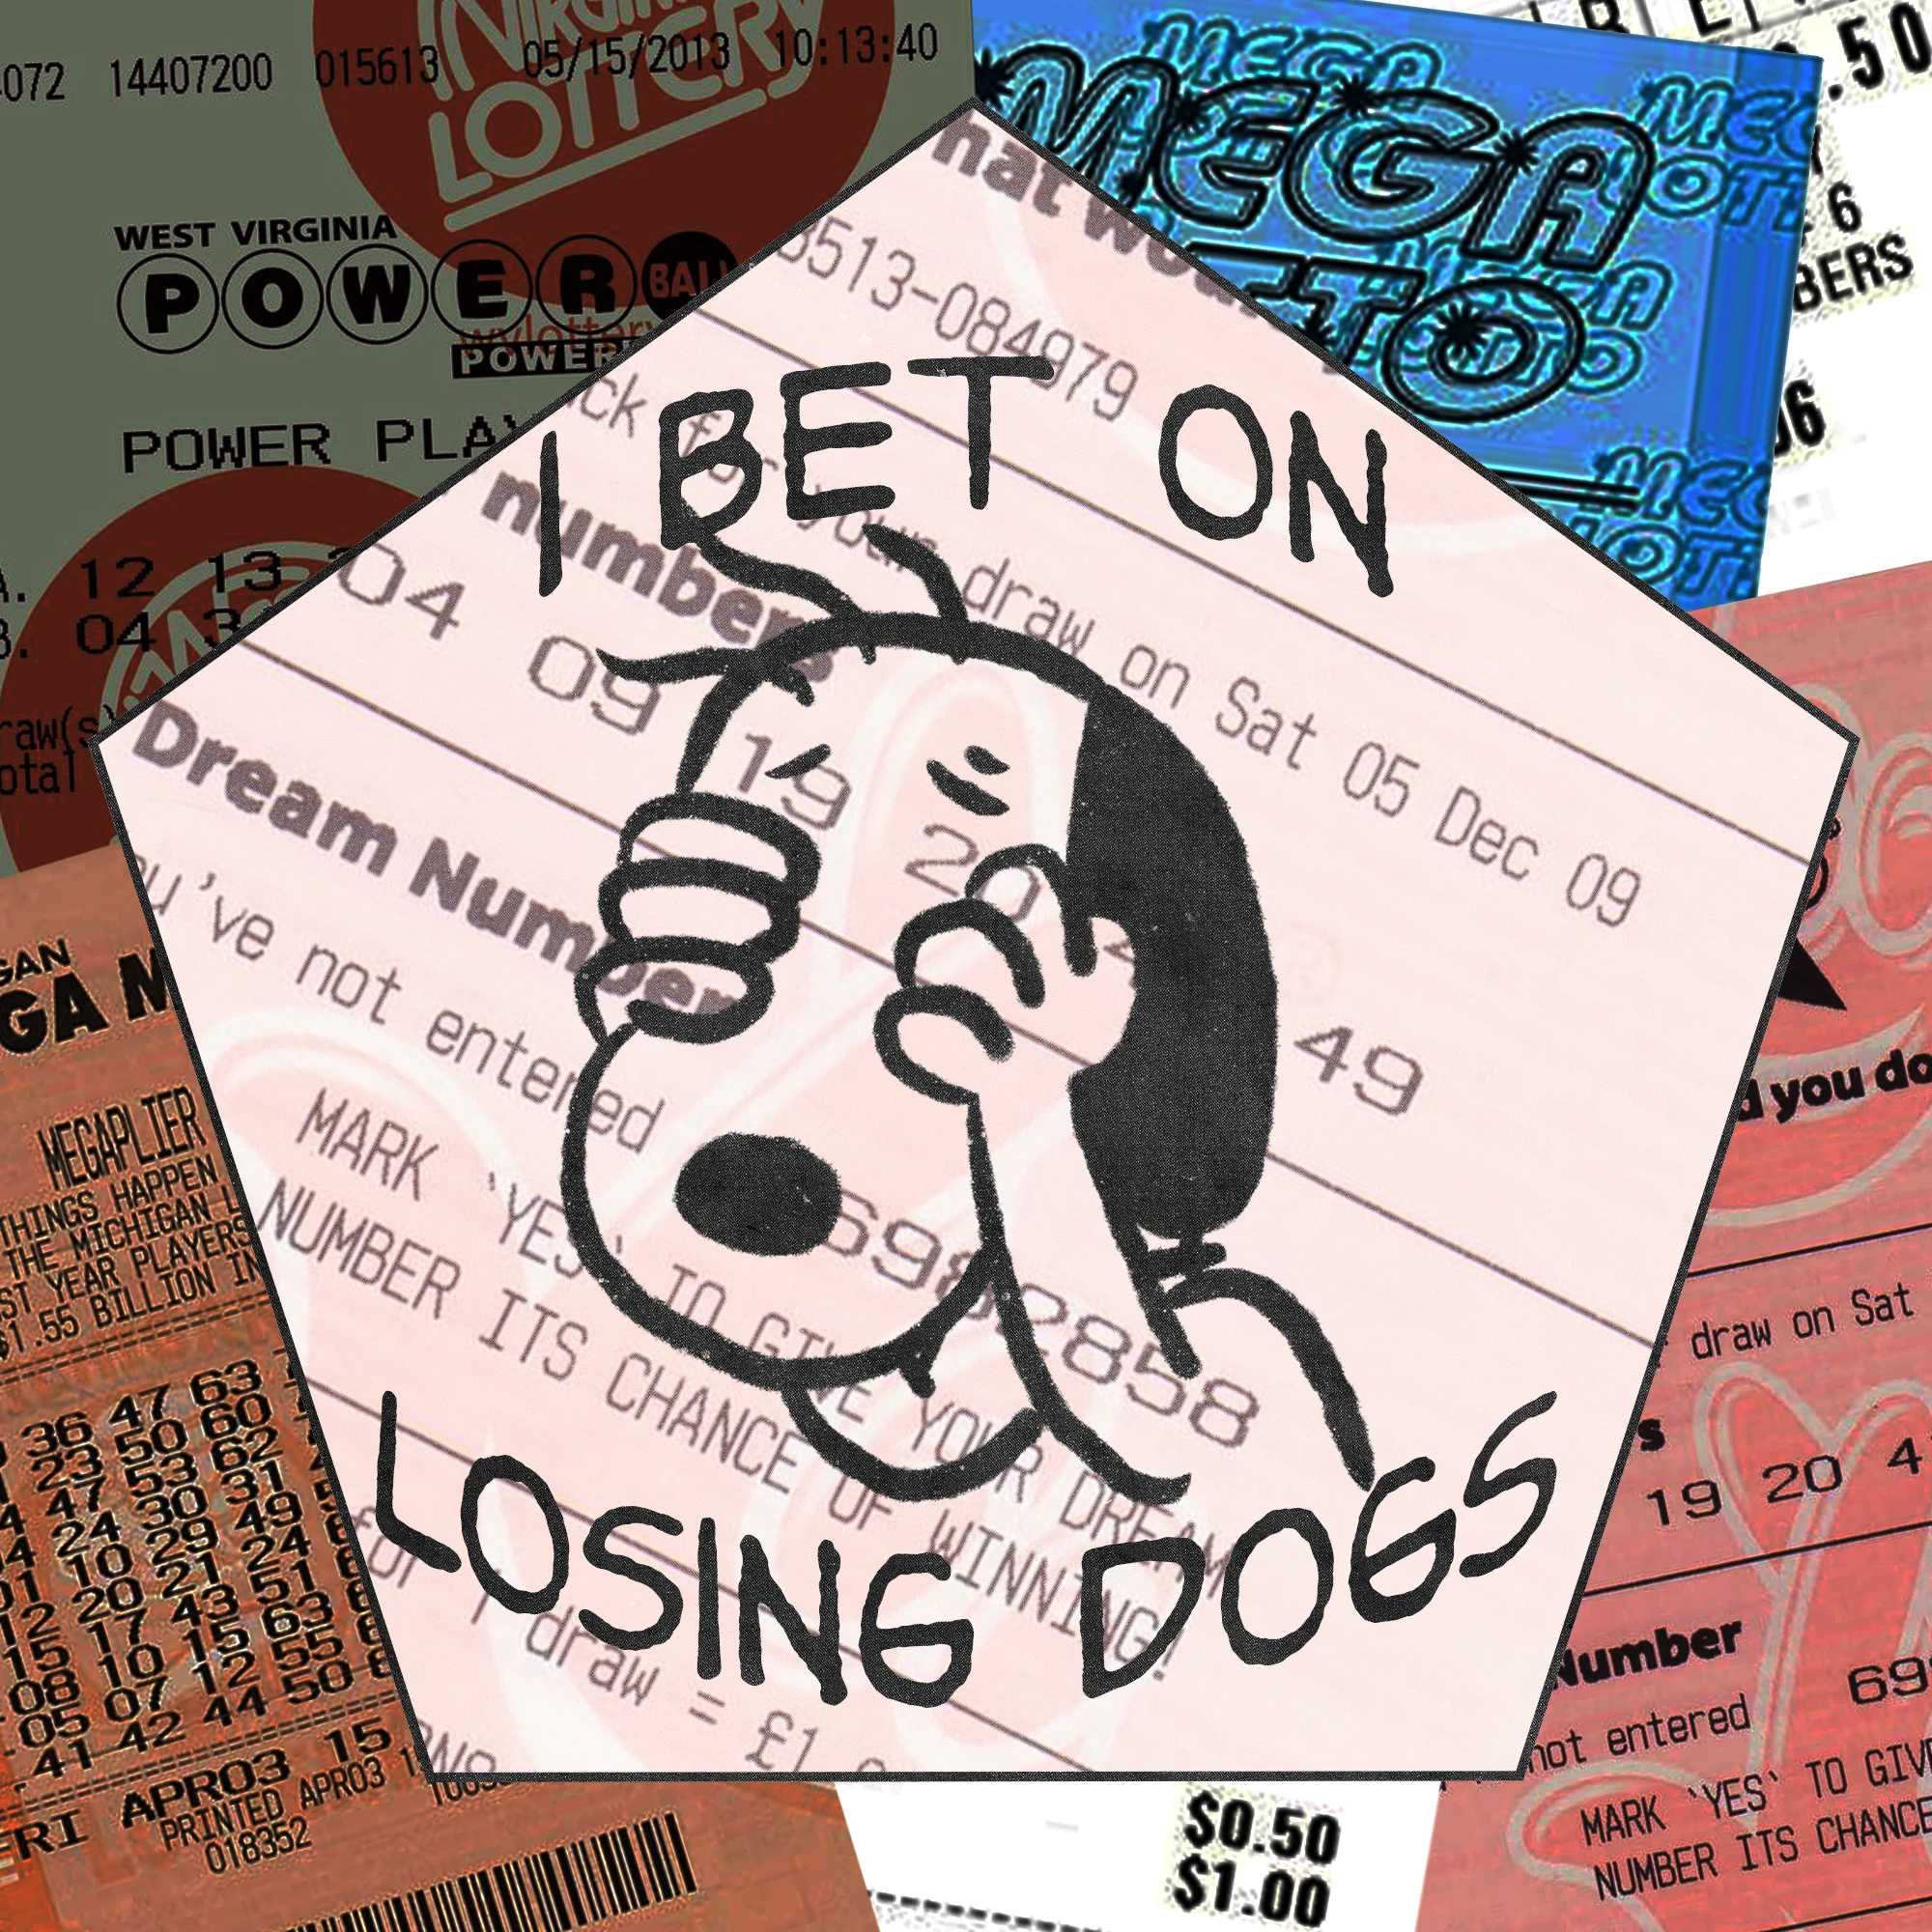 I BET ON LOSING DOGS STICKERS